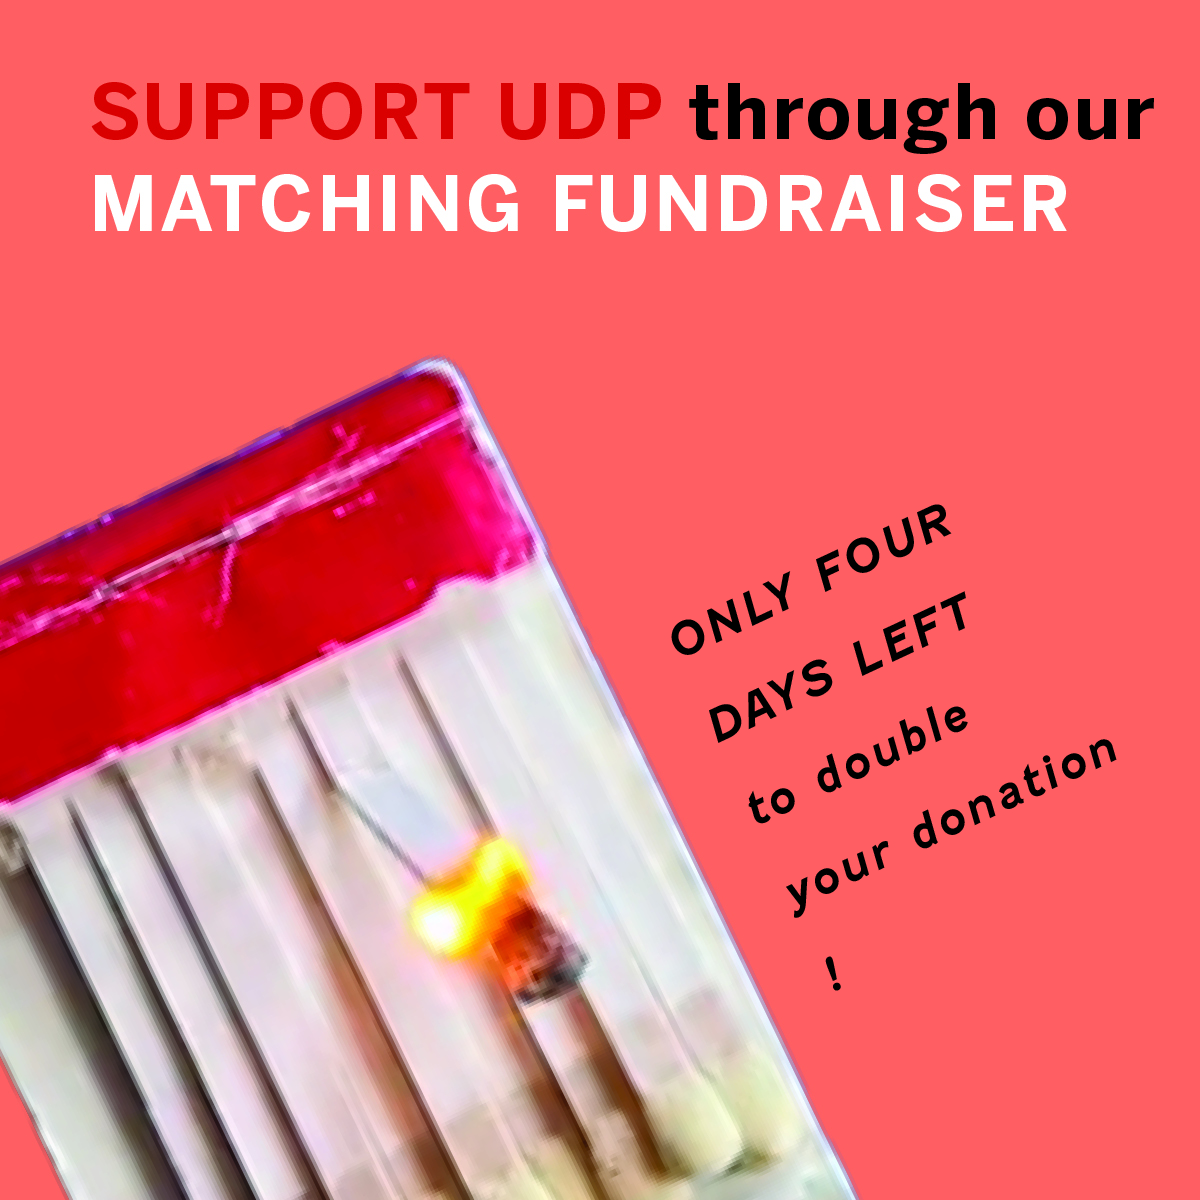 Got a light?🔥 Until July 31, all donations up to $7000 will be matched by generous donors. We're only $2,500 away from our goal — help us meet it! Donate at the link in our bio🦢